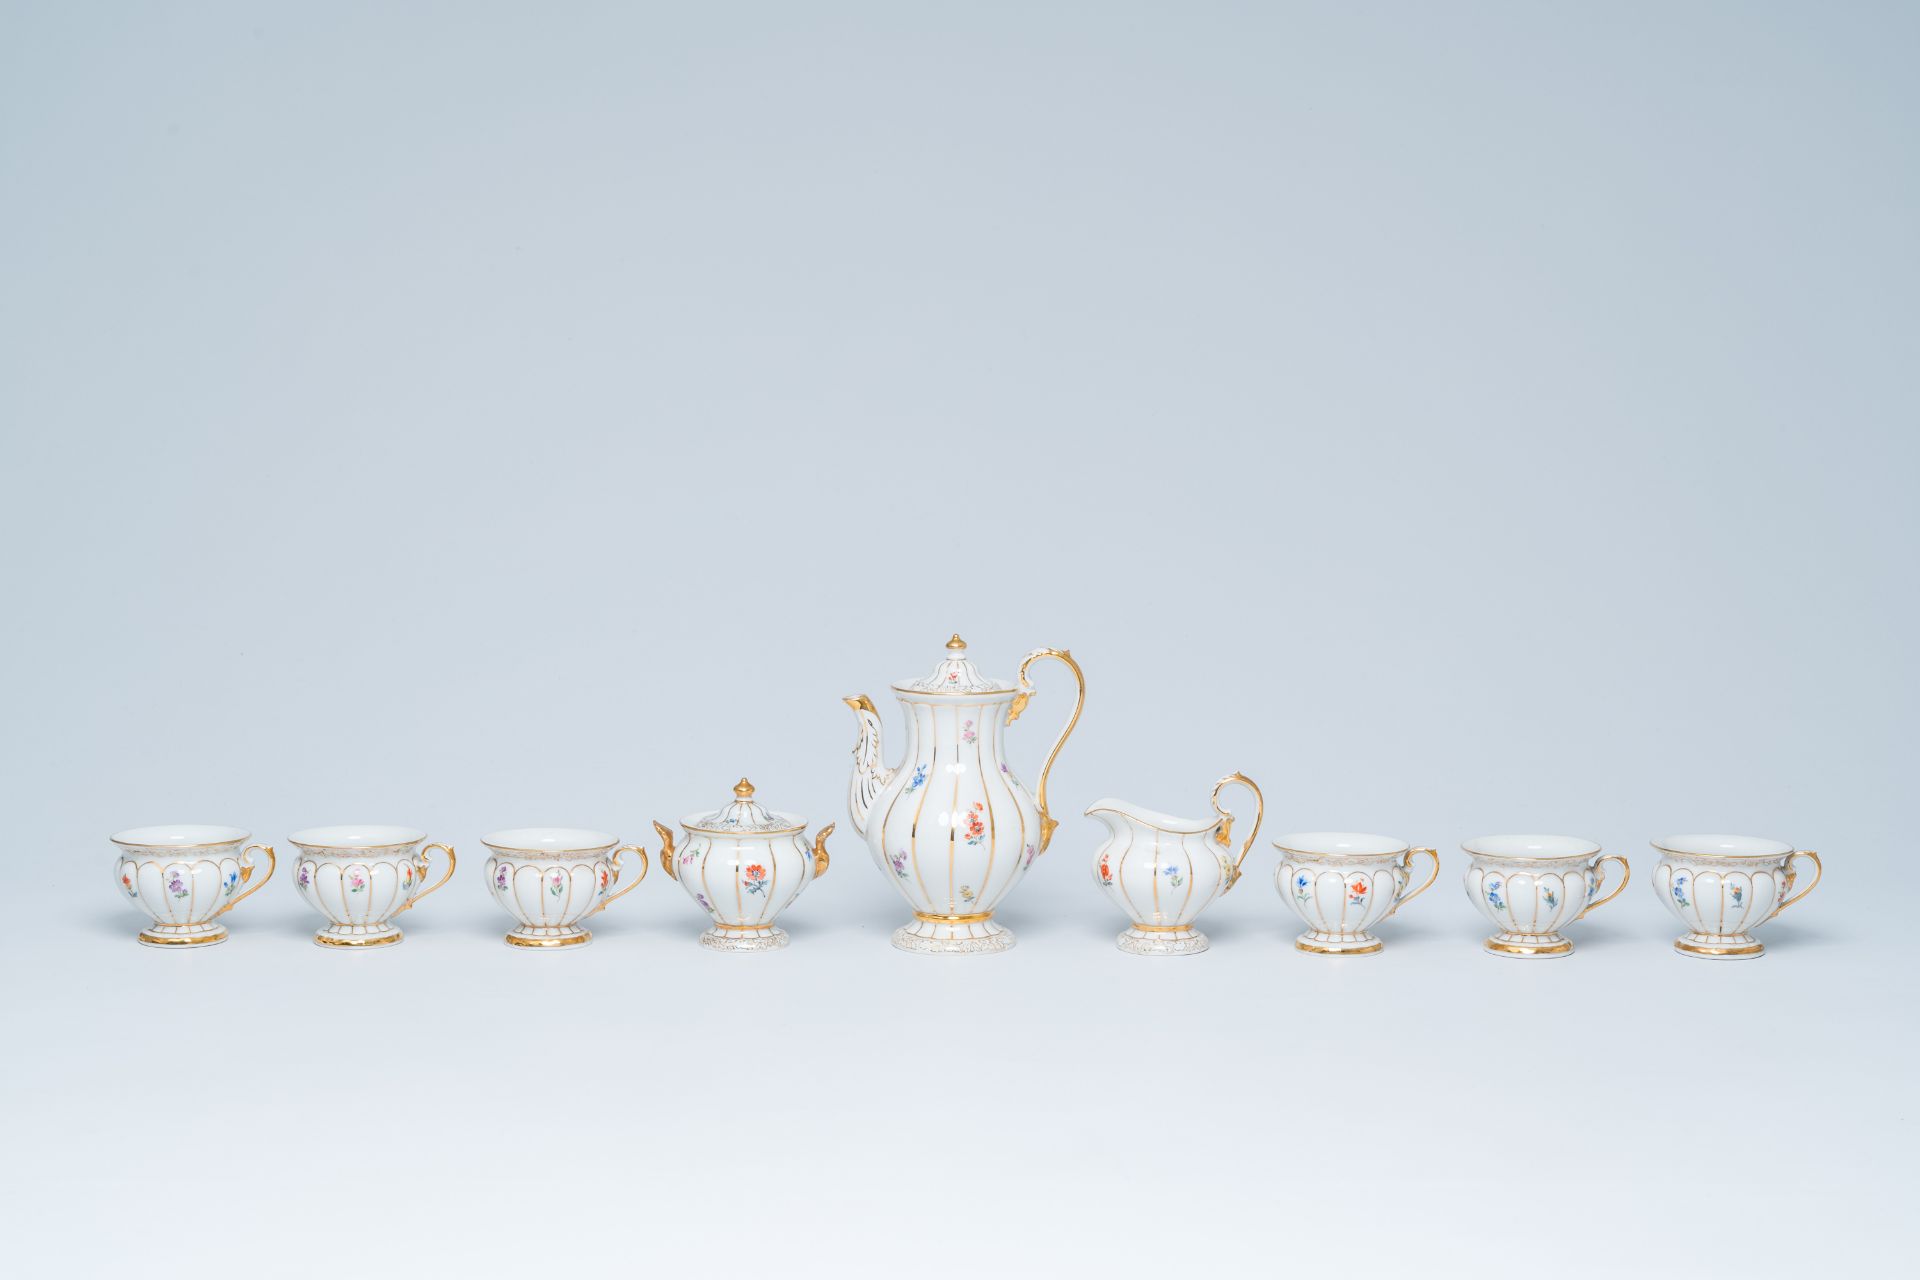 A German fifteen-piece polychrome and gilt Meissen mocha service with floral design, 20th C. - Image 5 of 10